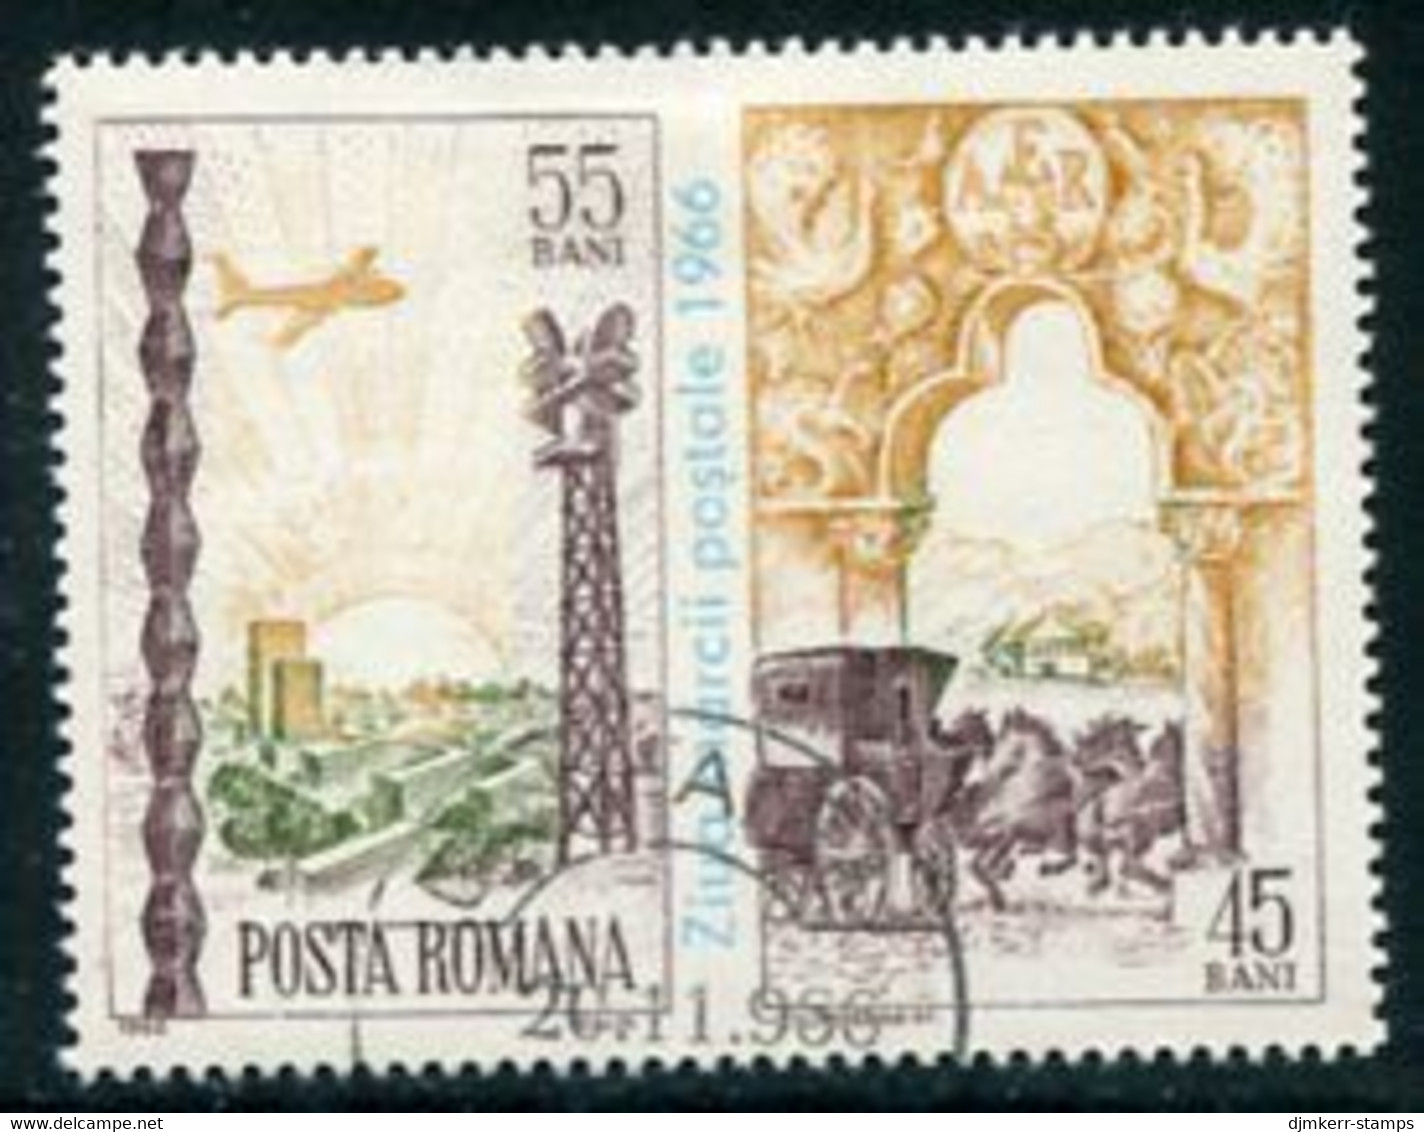 ROMANIA 1966 Stamp Day Used.  Michel 2552 - Oblitérés